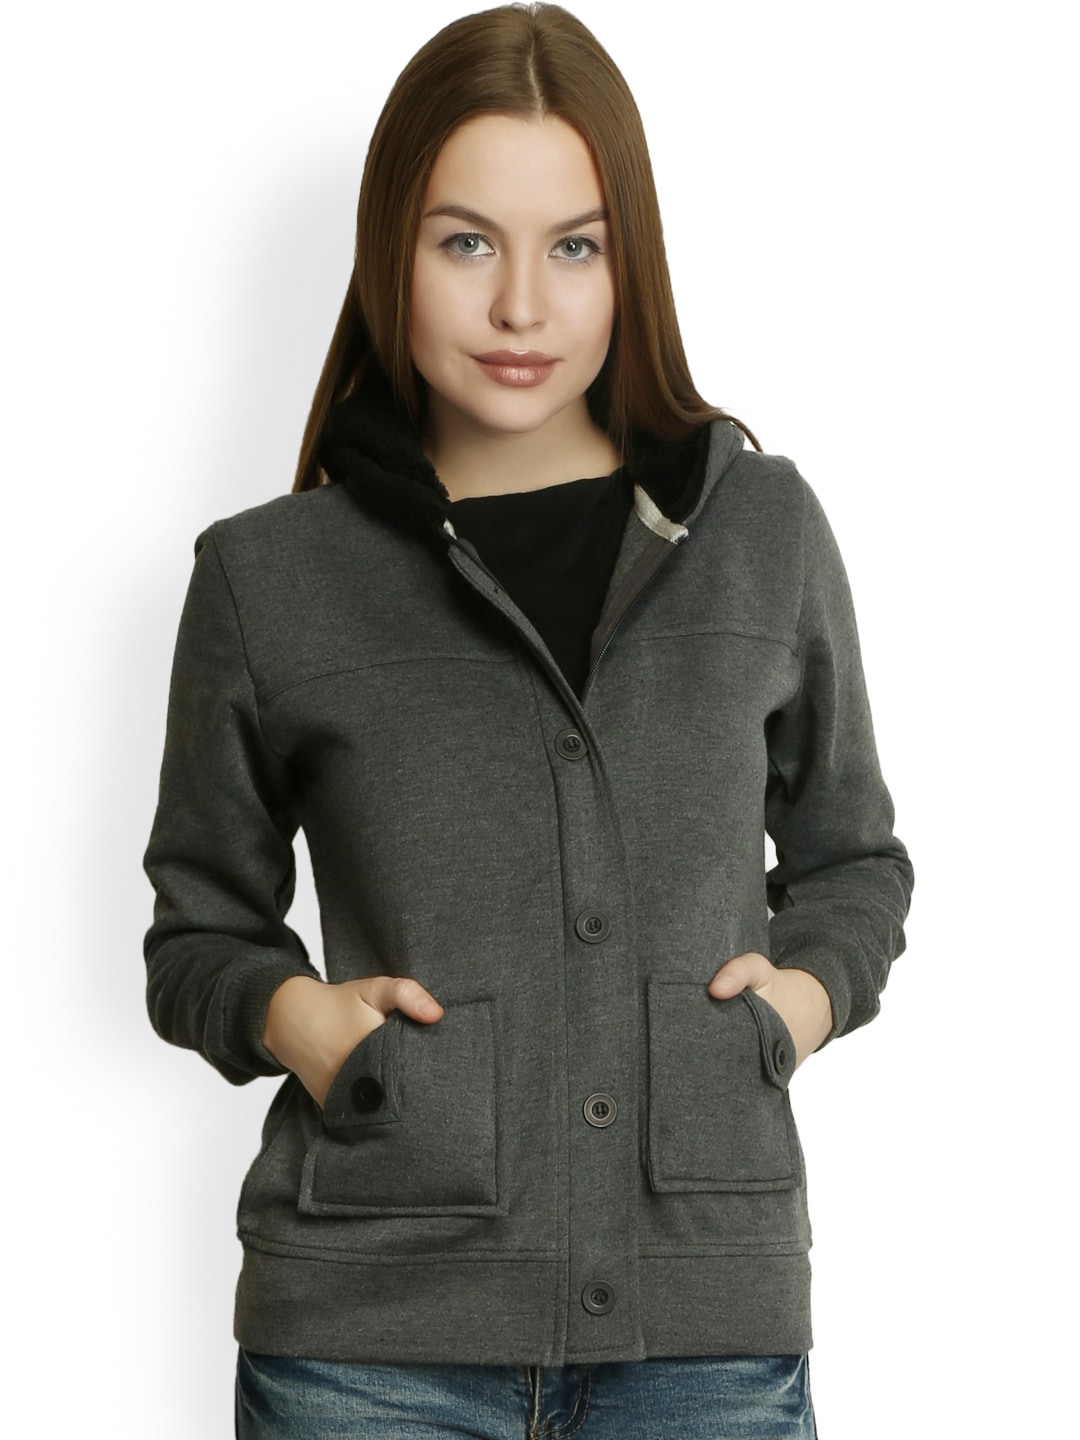 Belle Fille Women Grey Hooded Jacket Price in India